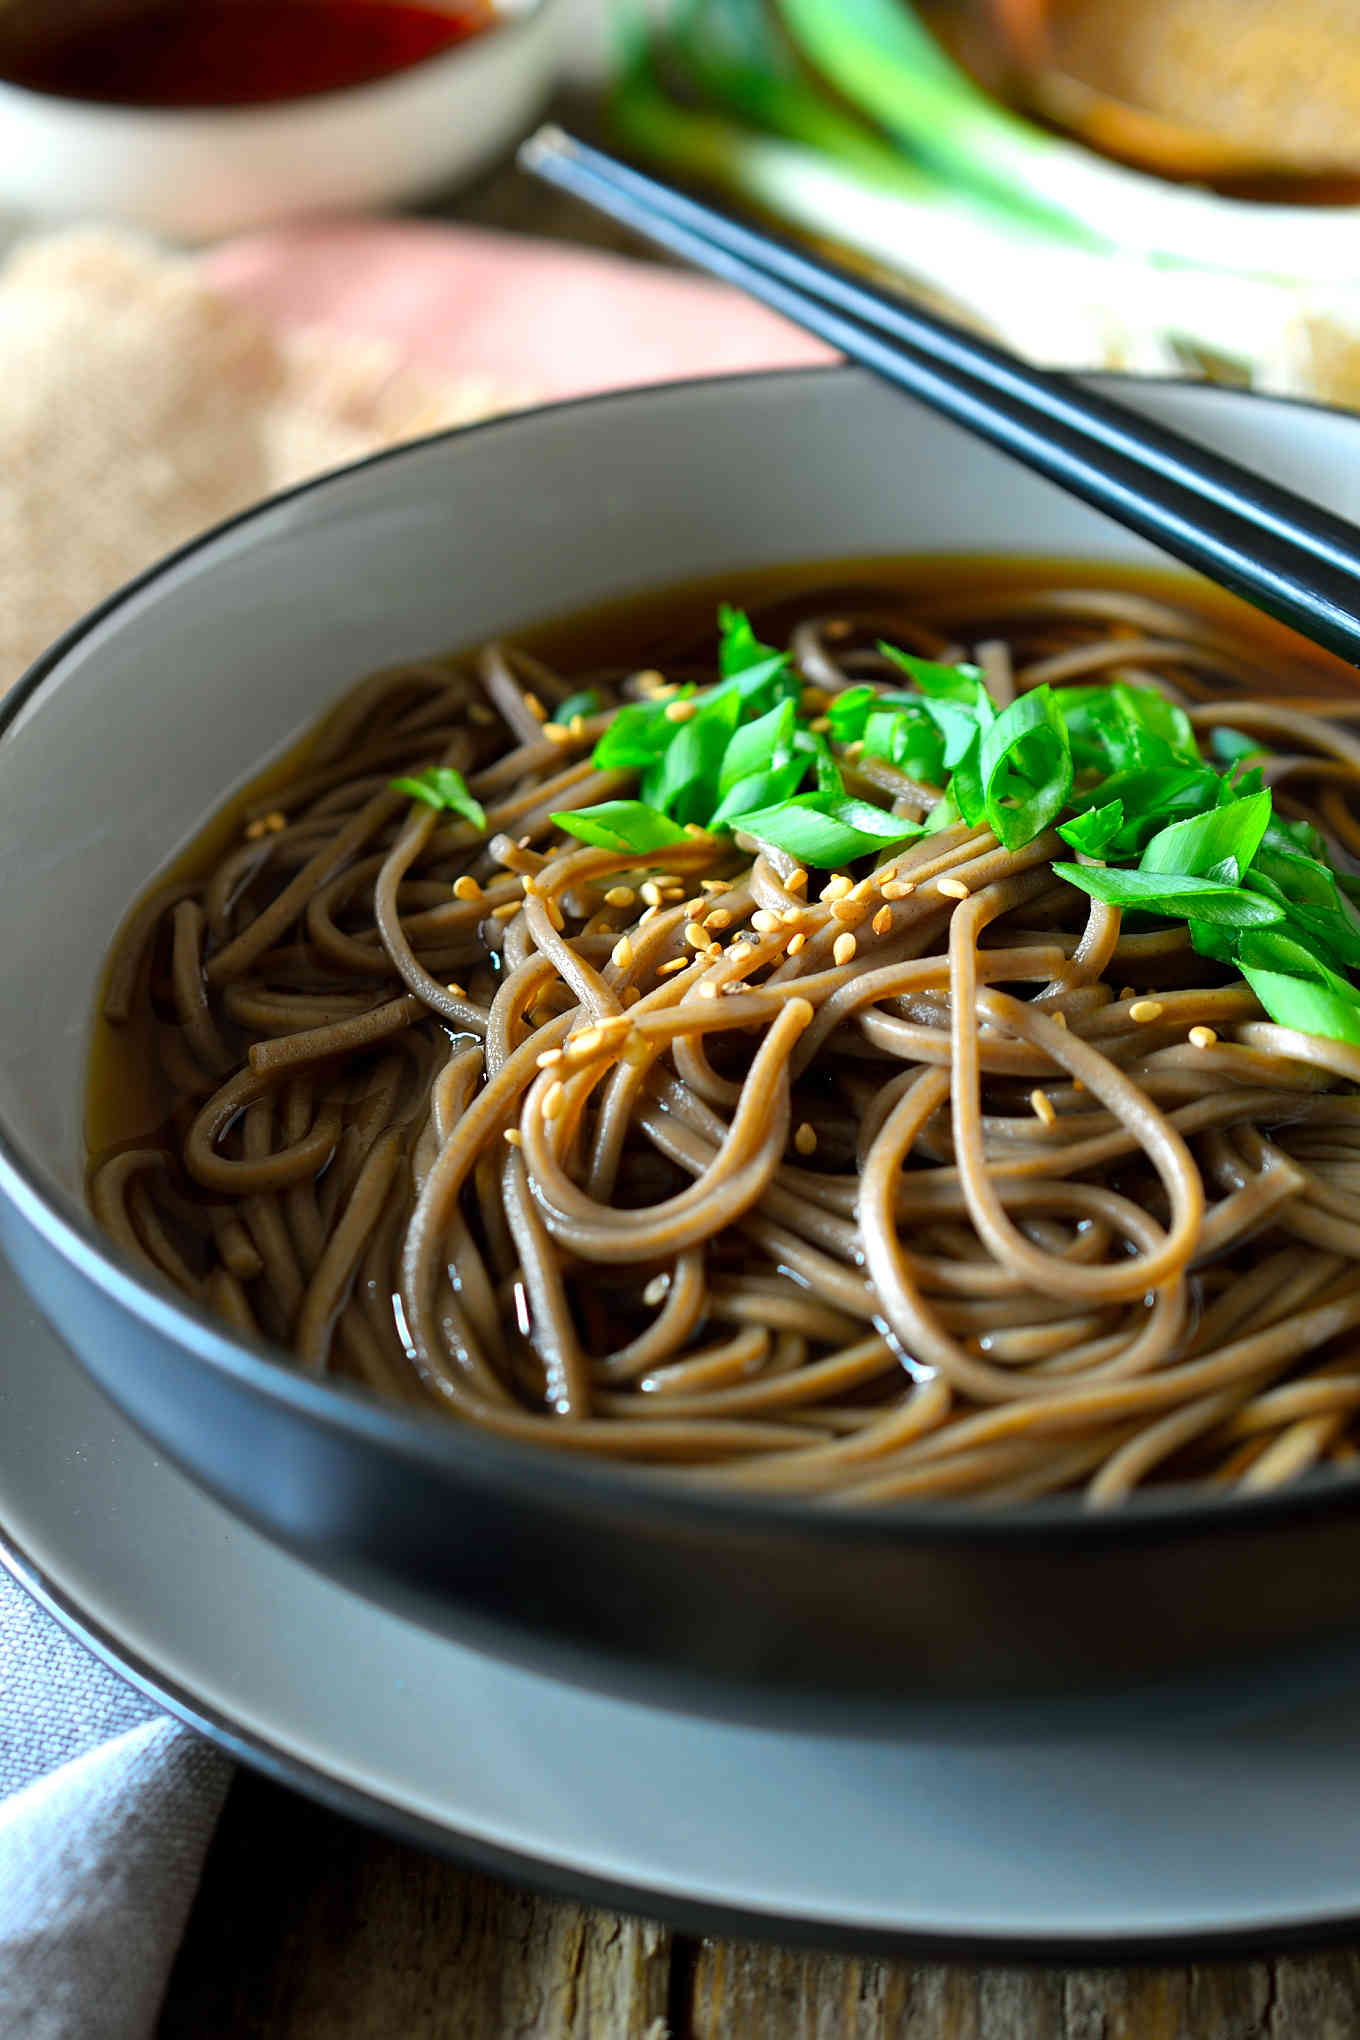 You don’t need to wait until New Year’s Eve to make this delicious toshikoshi soba recipe. This dish is extremely easy to make with just a simple and wonderful umami broth and nutty soba noodles. Sprinkle over some sesame seeds and chopped green onion for a bit of colour and crunch and you’ve got a lip-smacking, steaming bowl of soba noodle soup.